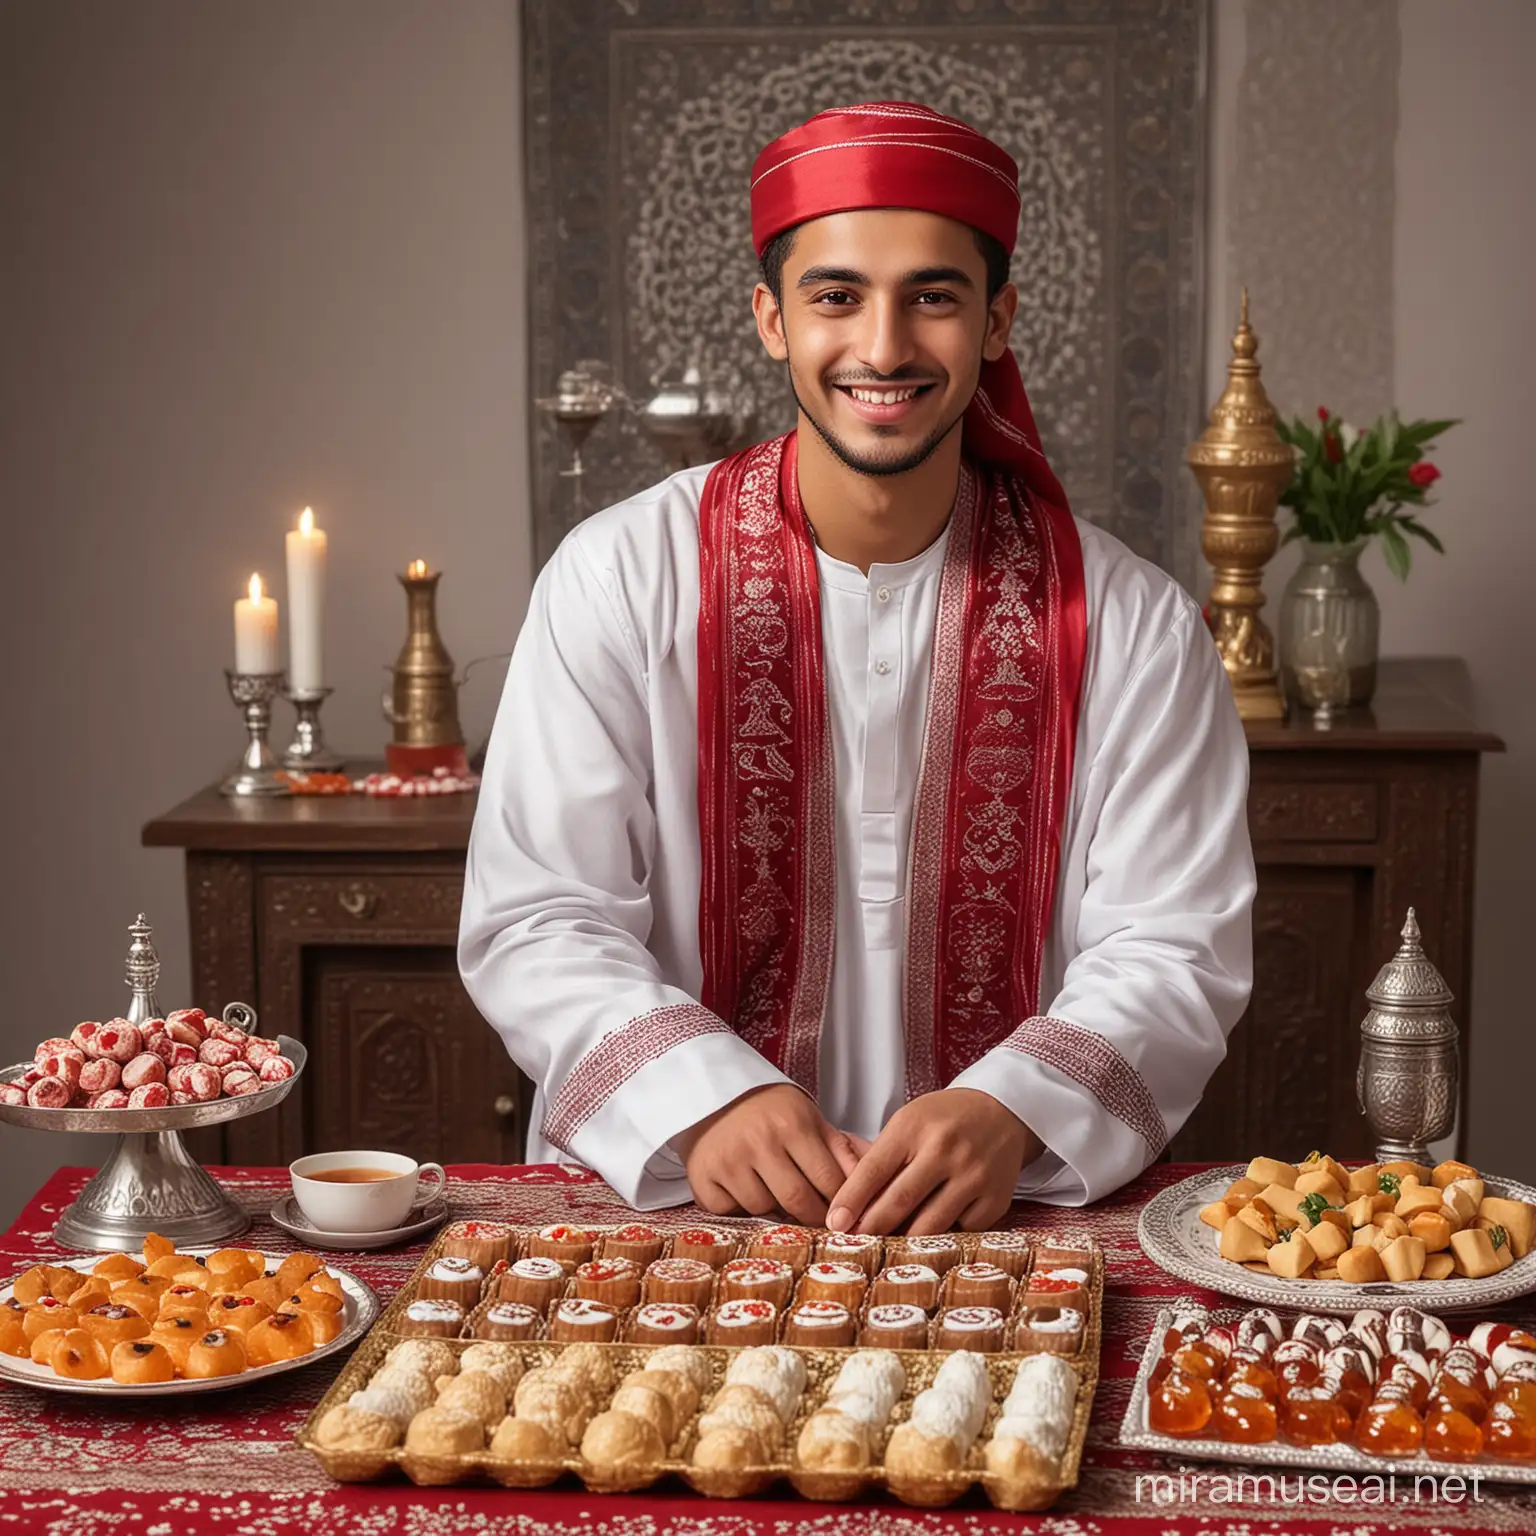 A real picture of a smiling, elegant Moroccan young man celebrating Eid al-Fitr. In front of him is a table with a variety of sweets and tea. He is wearing a half-white and half-red robe. Behind him is the name “Karim” written in red crystal, and in his hands is the phrase “Eid mubarak.” A high-quality, realistic picture.hd, 4k